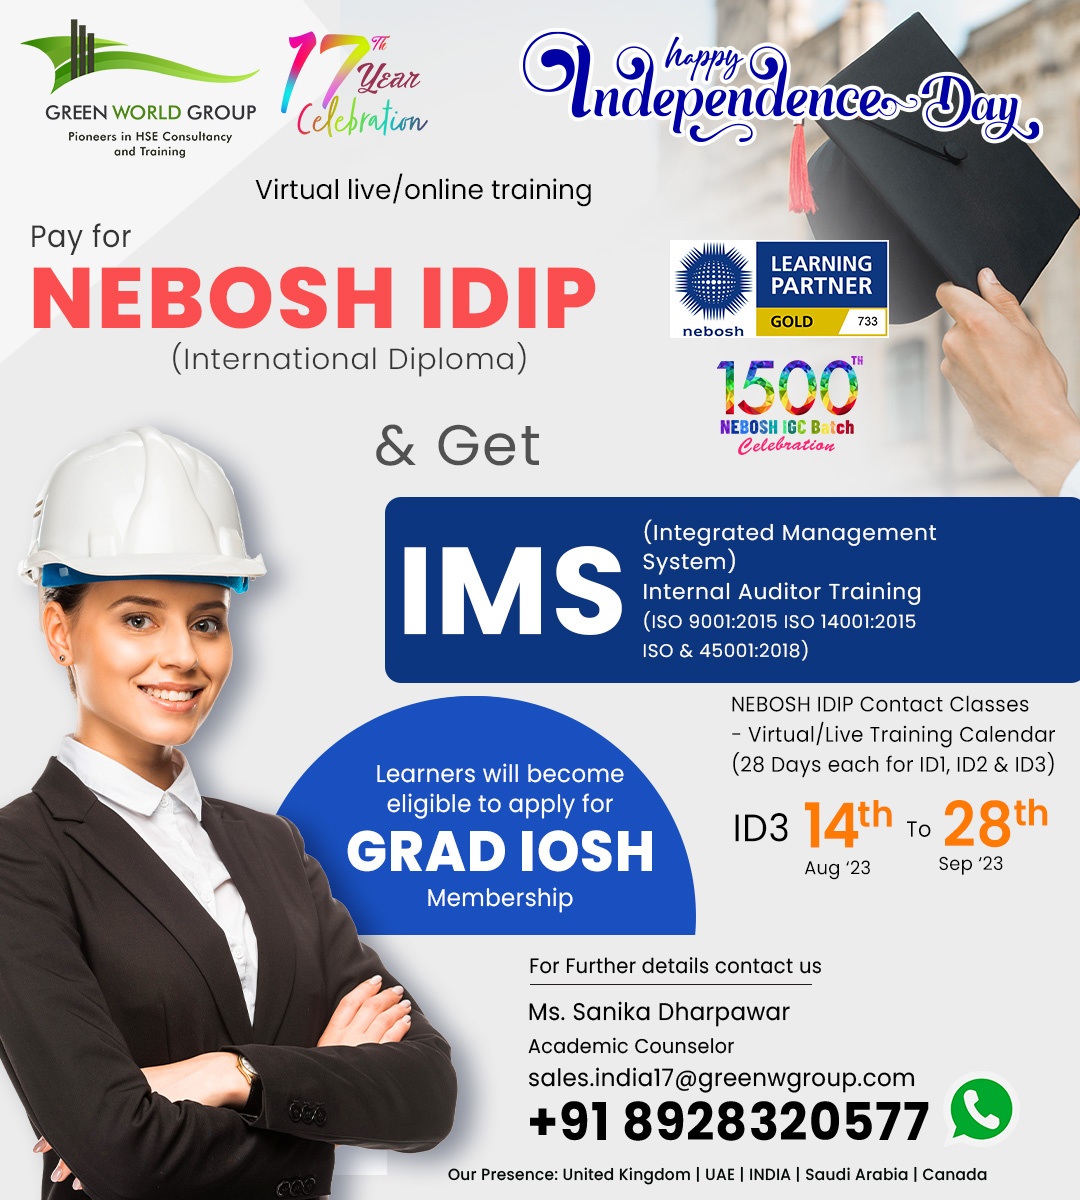  Nebosh IDip courses in PUNE at affordable cost